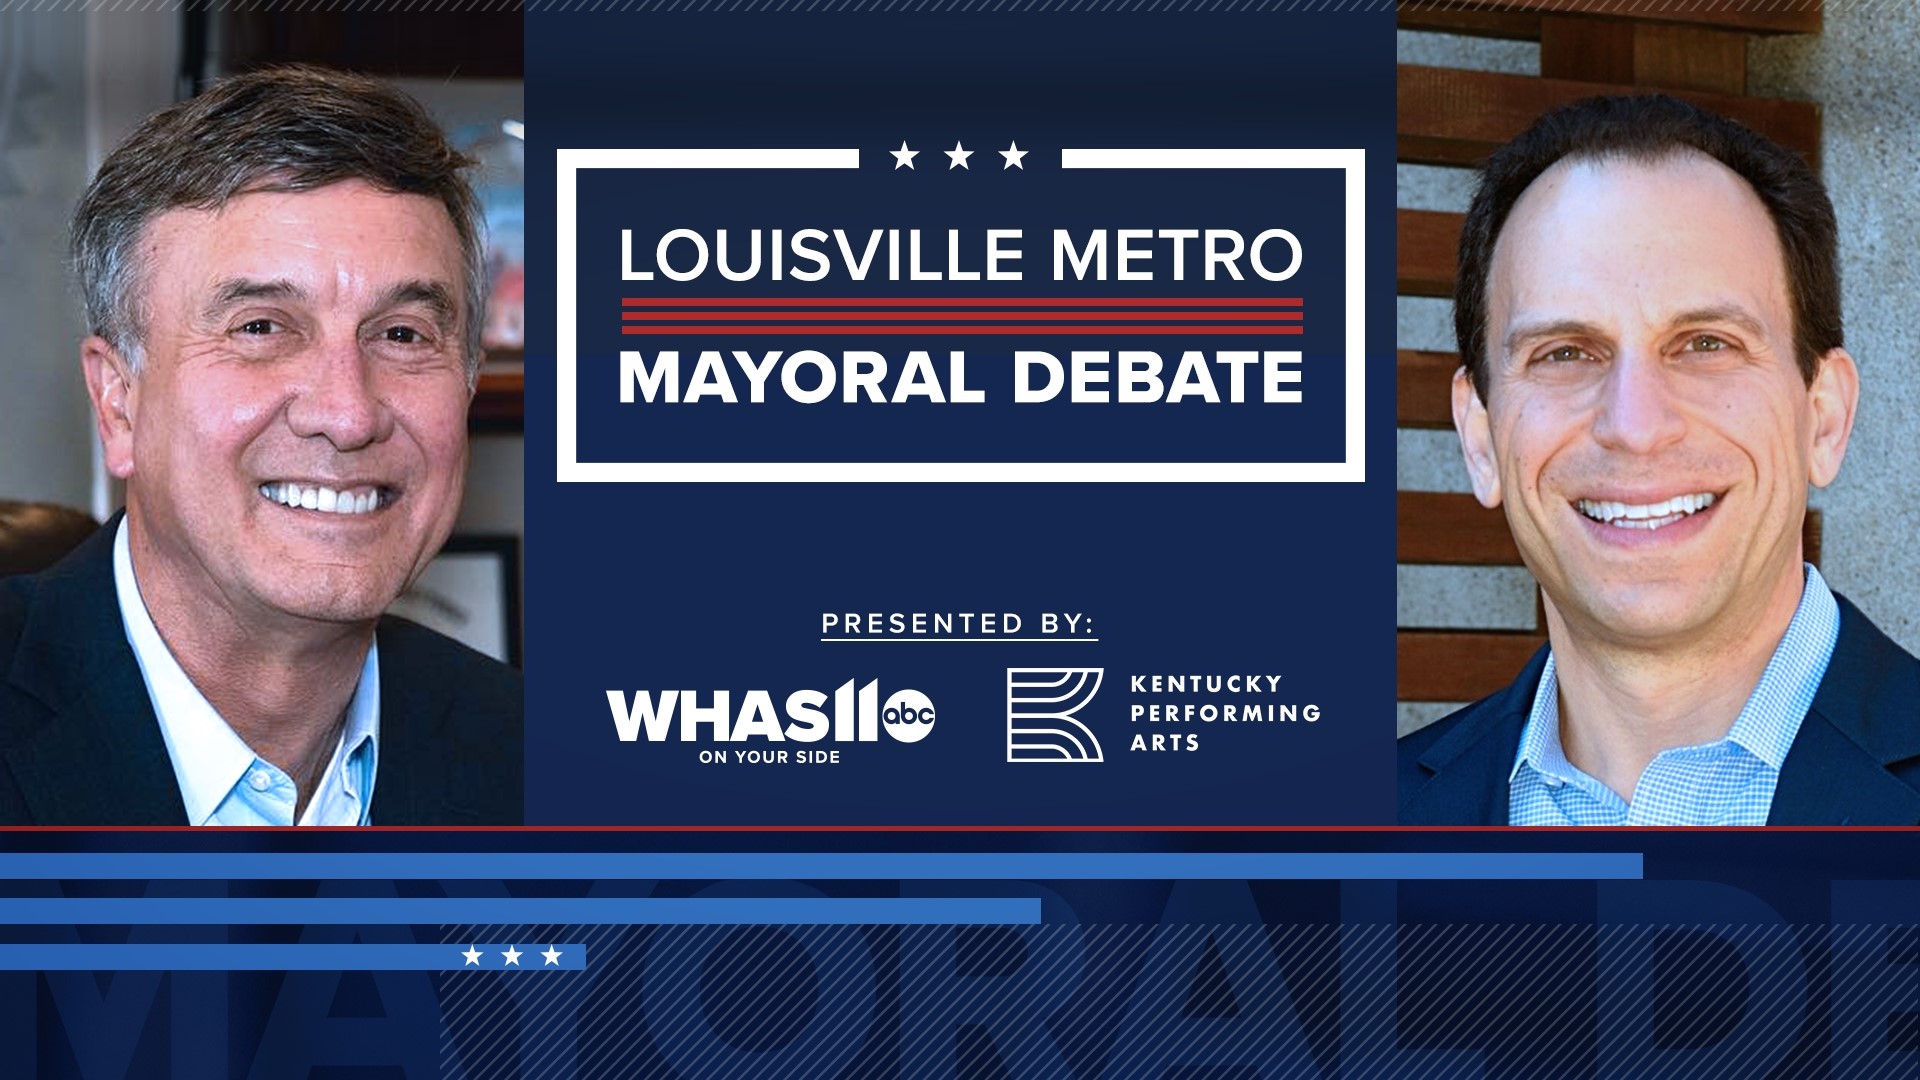 Louisville mayoral candidates Bill Dieruf and Craig Greenberg discuss their vision for the city in a forum hosted by WHAS11 and Kentucky Performing Arts.